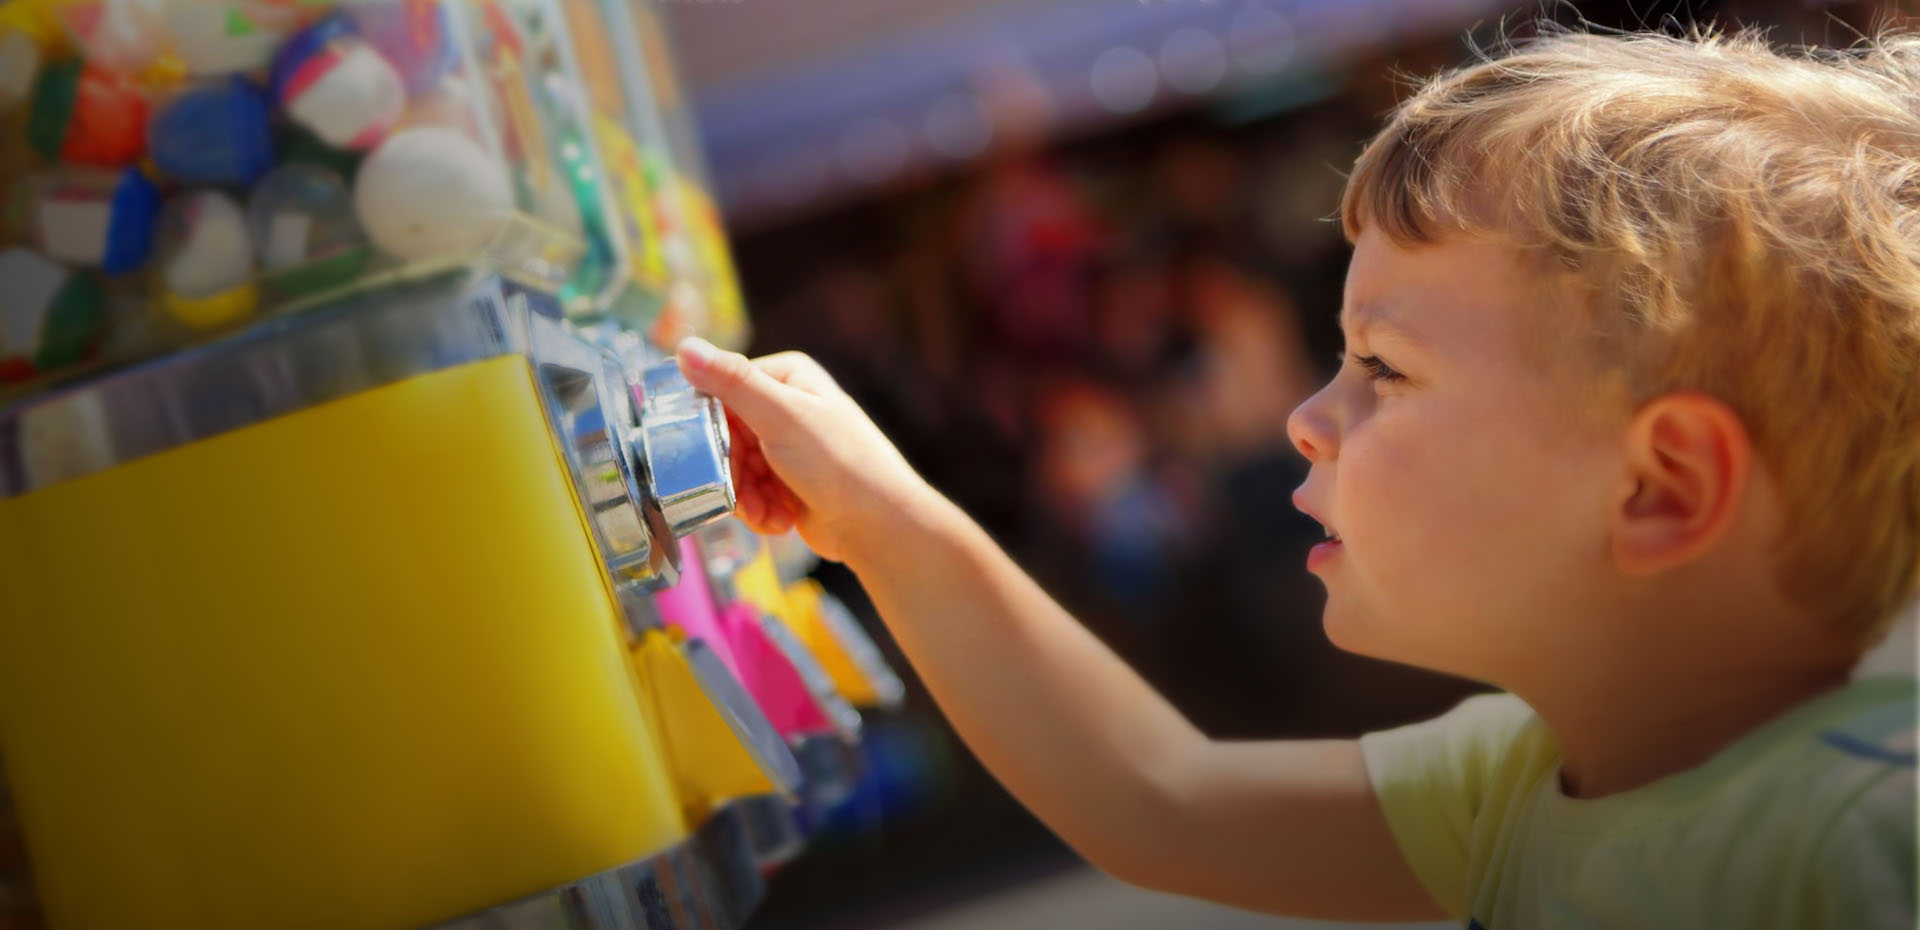 Installers Of Toys Vending Machines For Shopping Centres Kettering